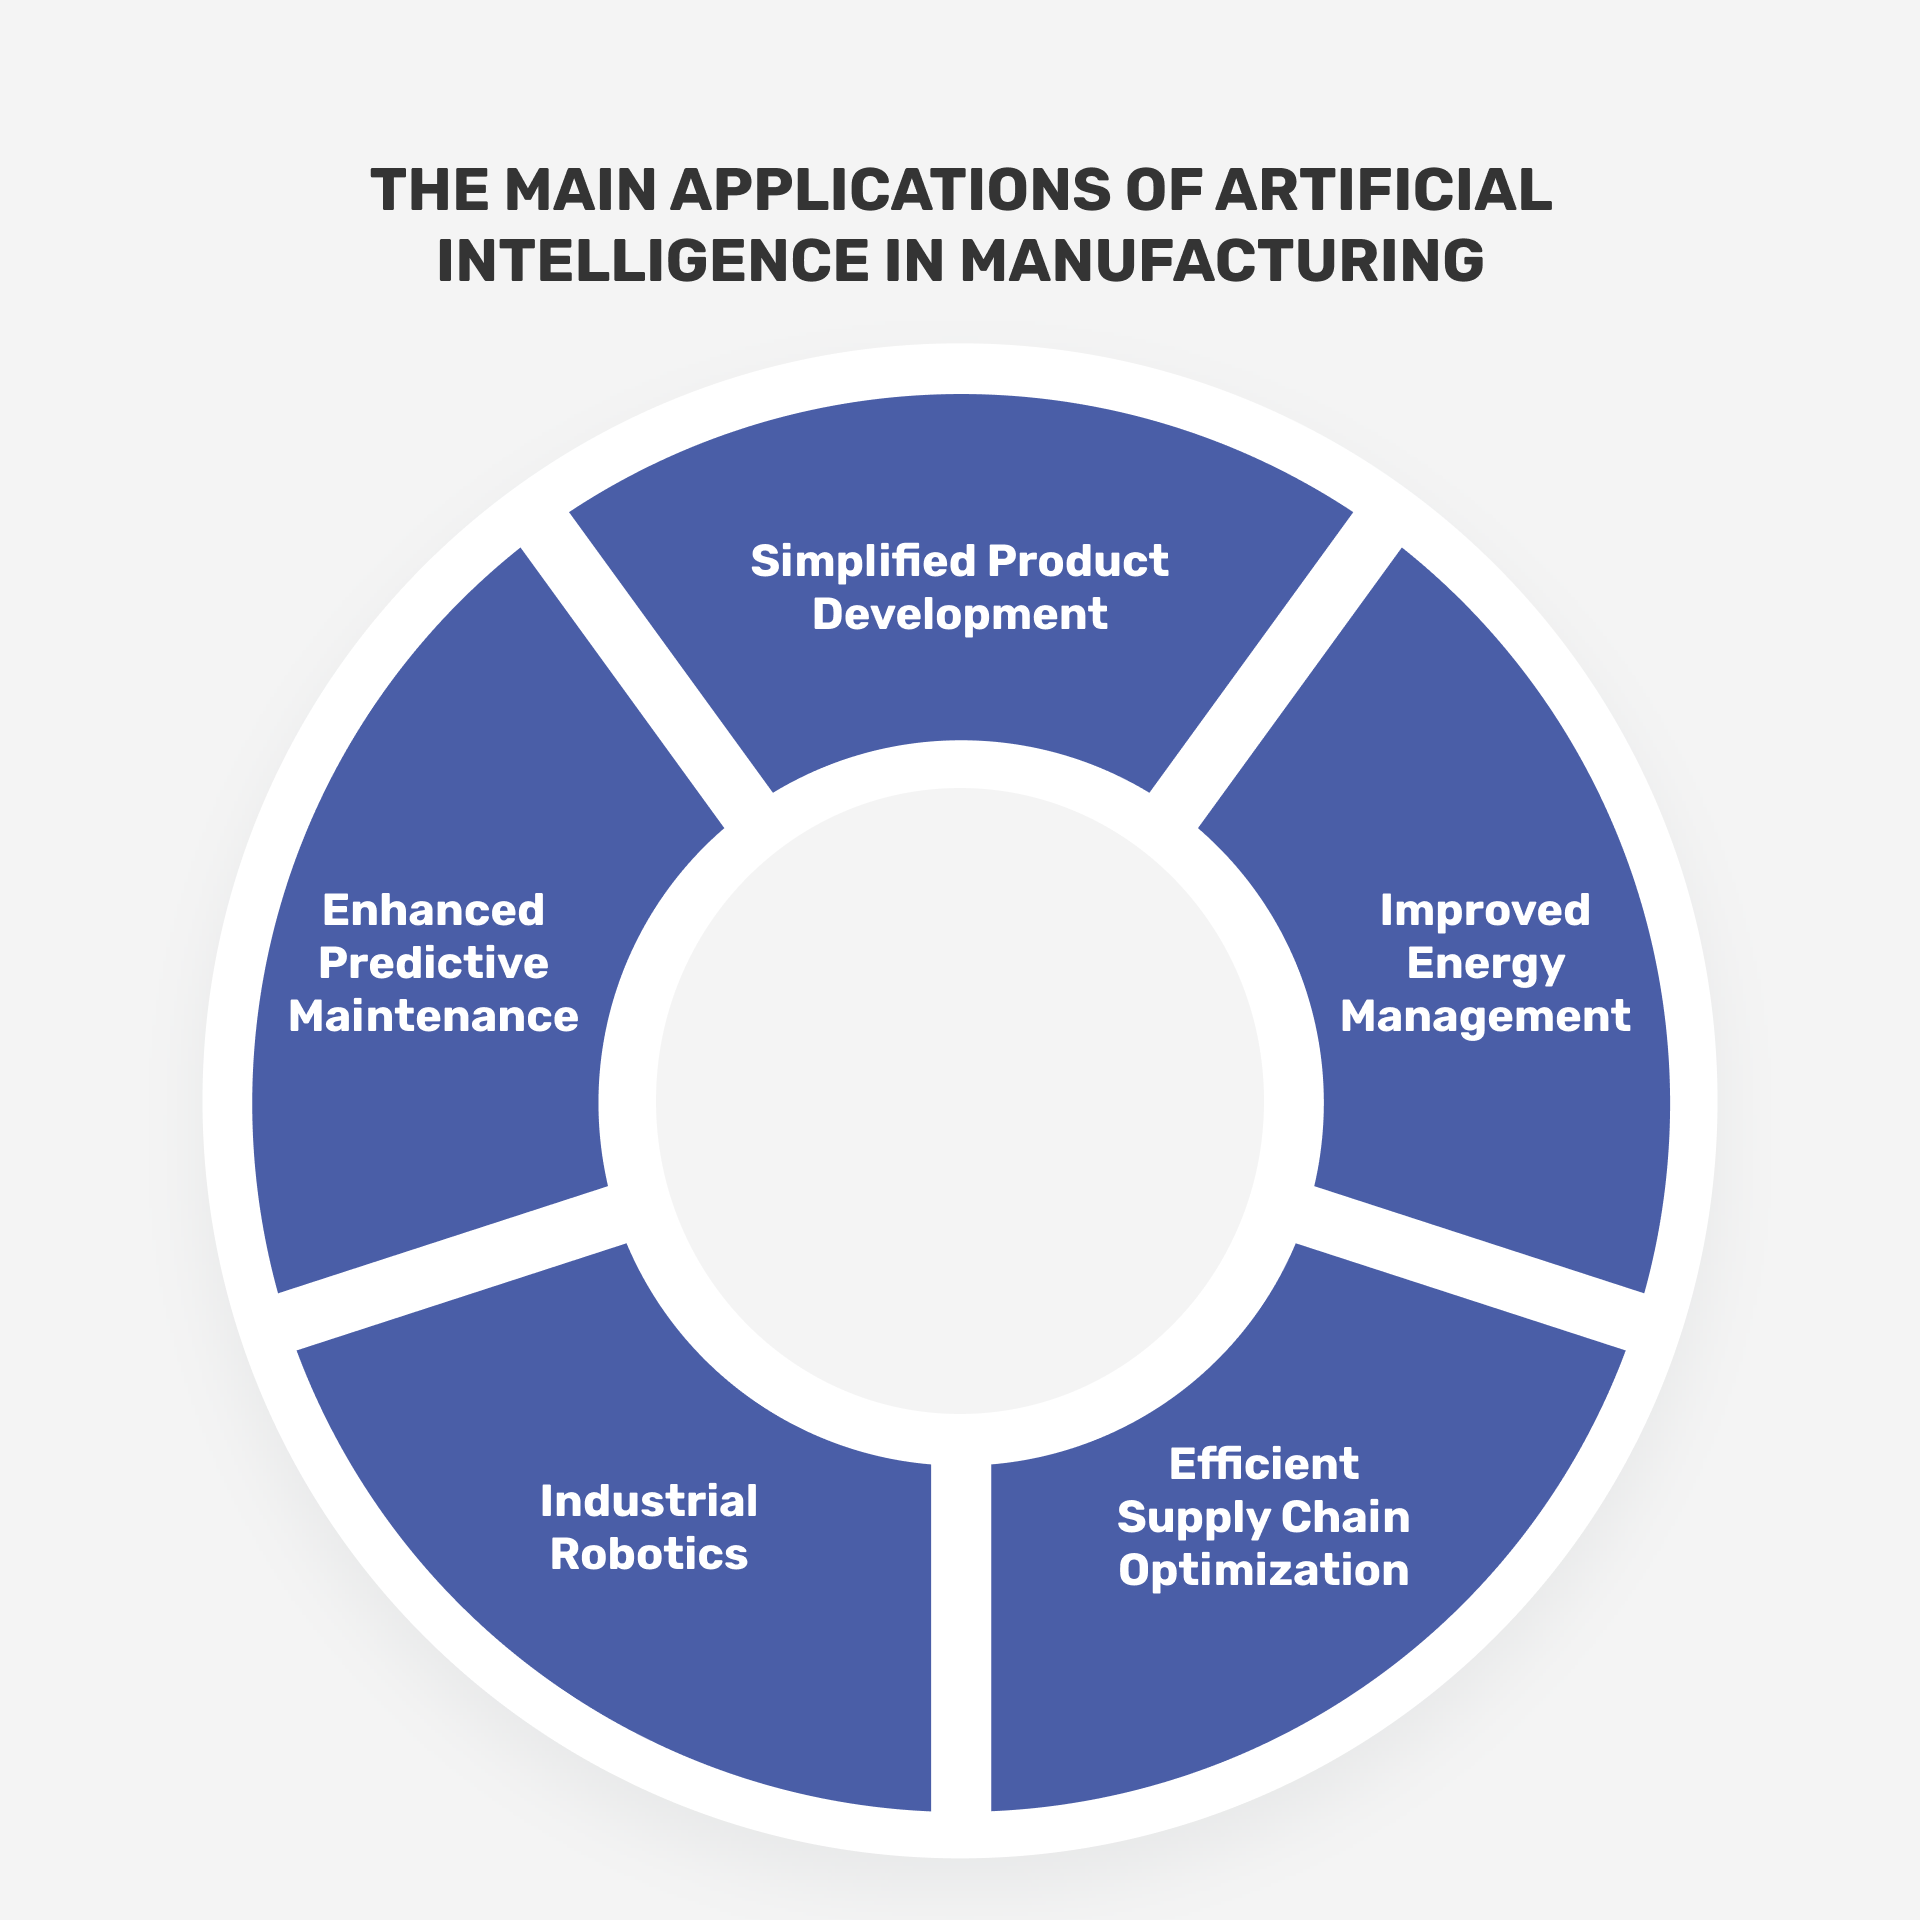 Artificial Intelligence and Machine Learning are commonly used in manufacturing for predictive maintenance, supply chain optimization, and product development.